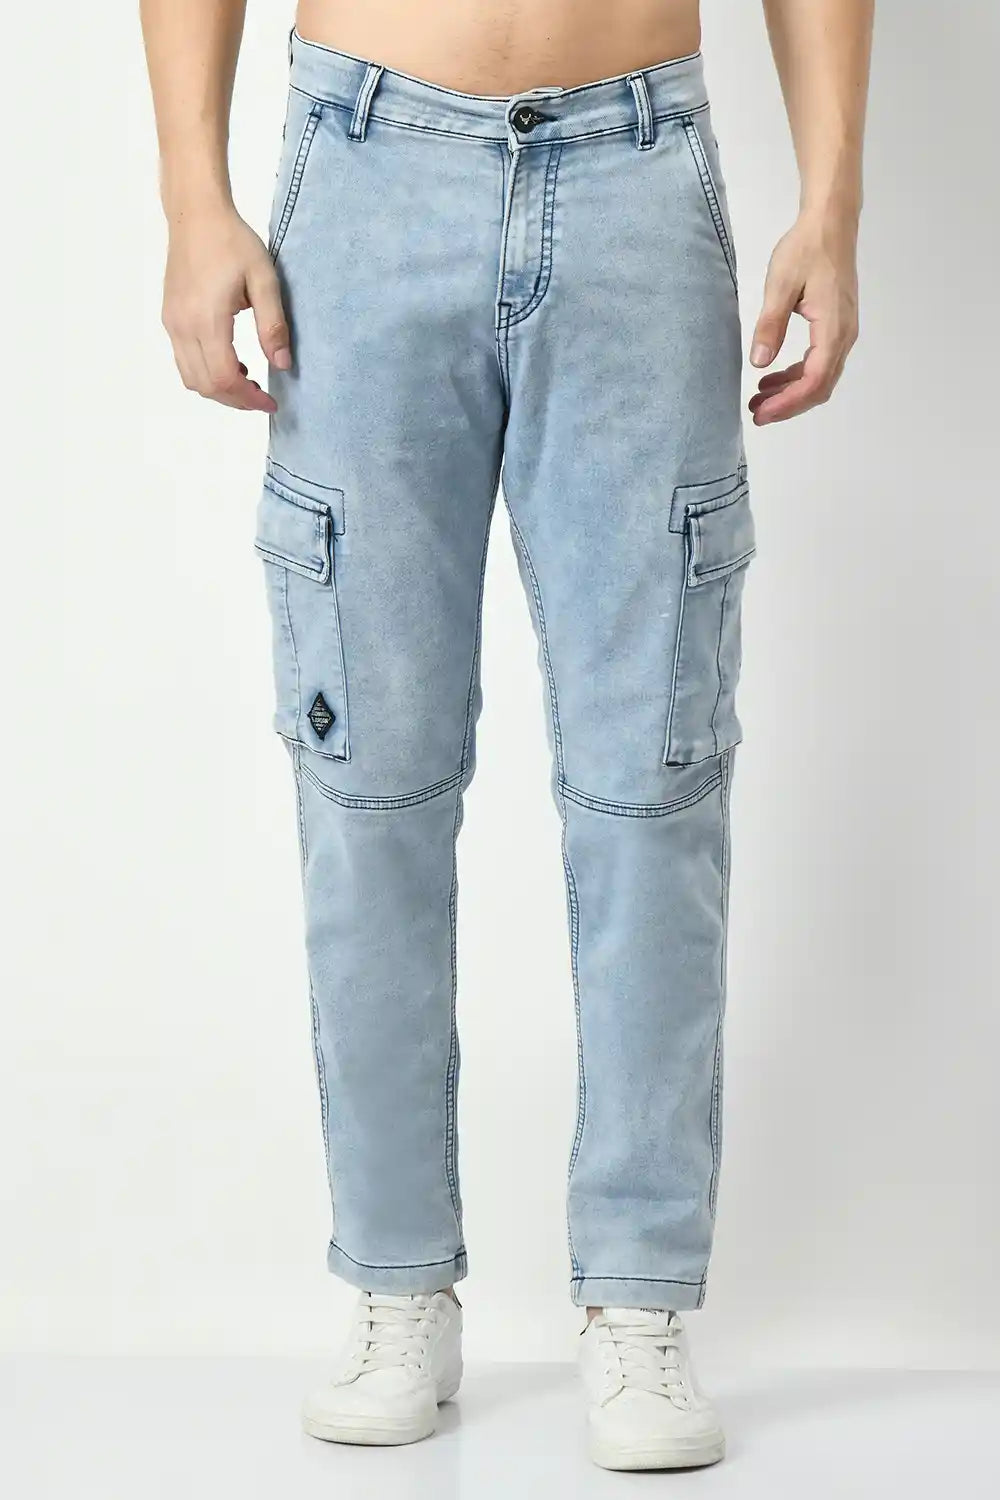 Stylish Denim Jogger Collection for Men | Jimmy Luxury